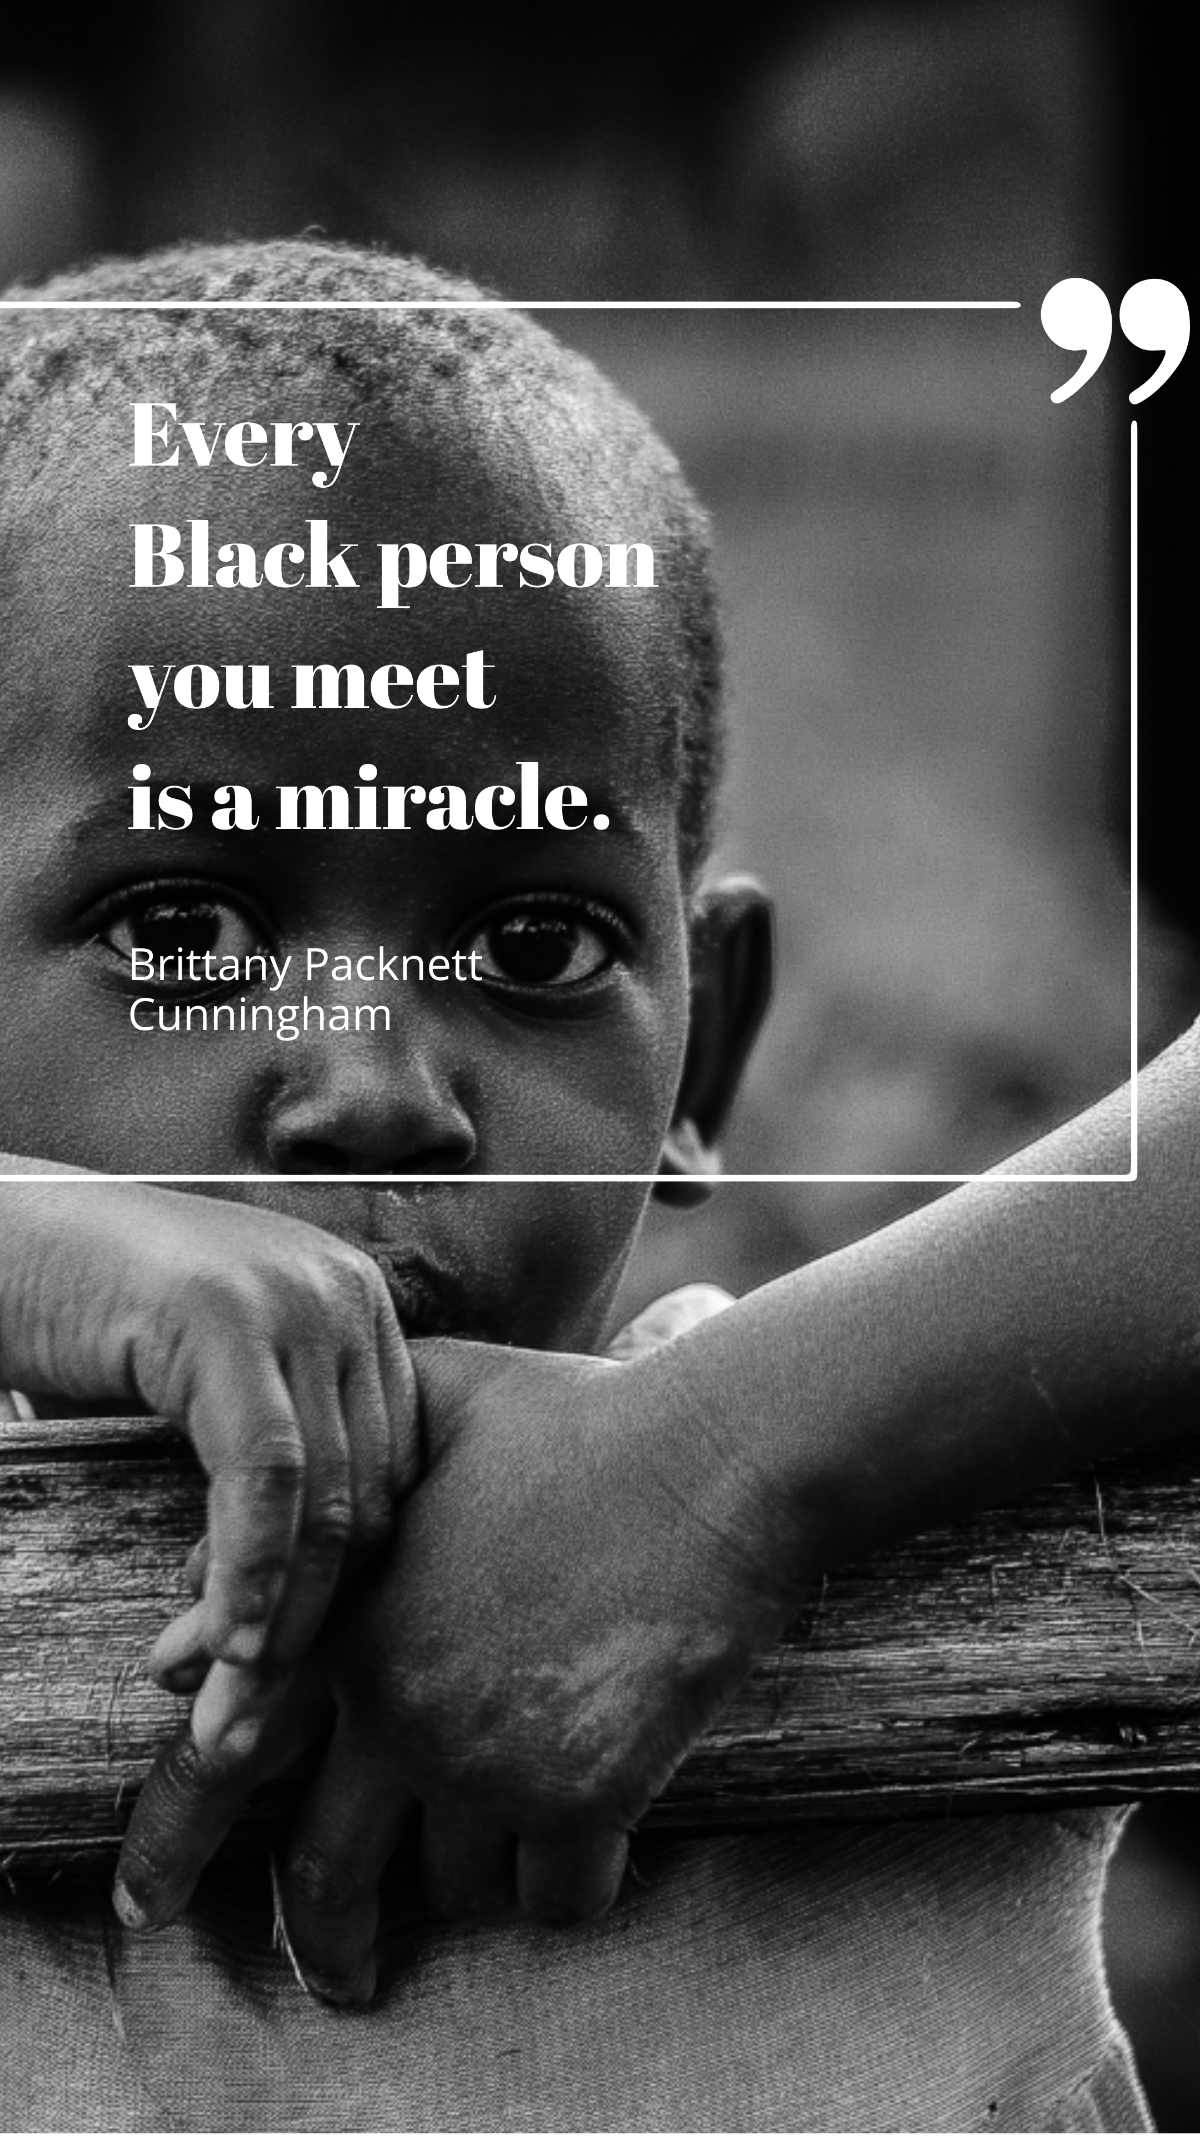 Brittany Packnett Cunningham - Every Black person you meet is a miracle.